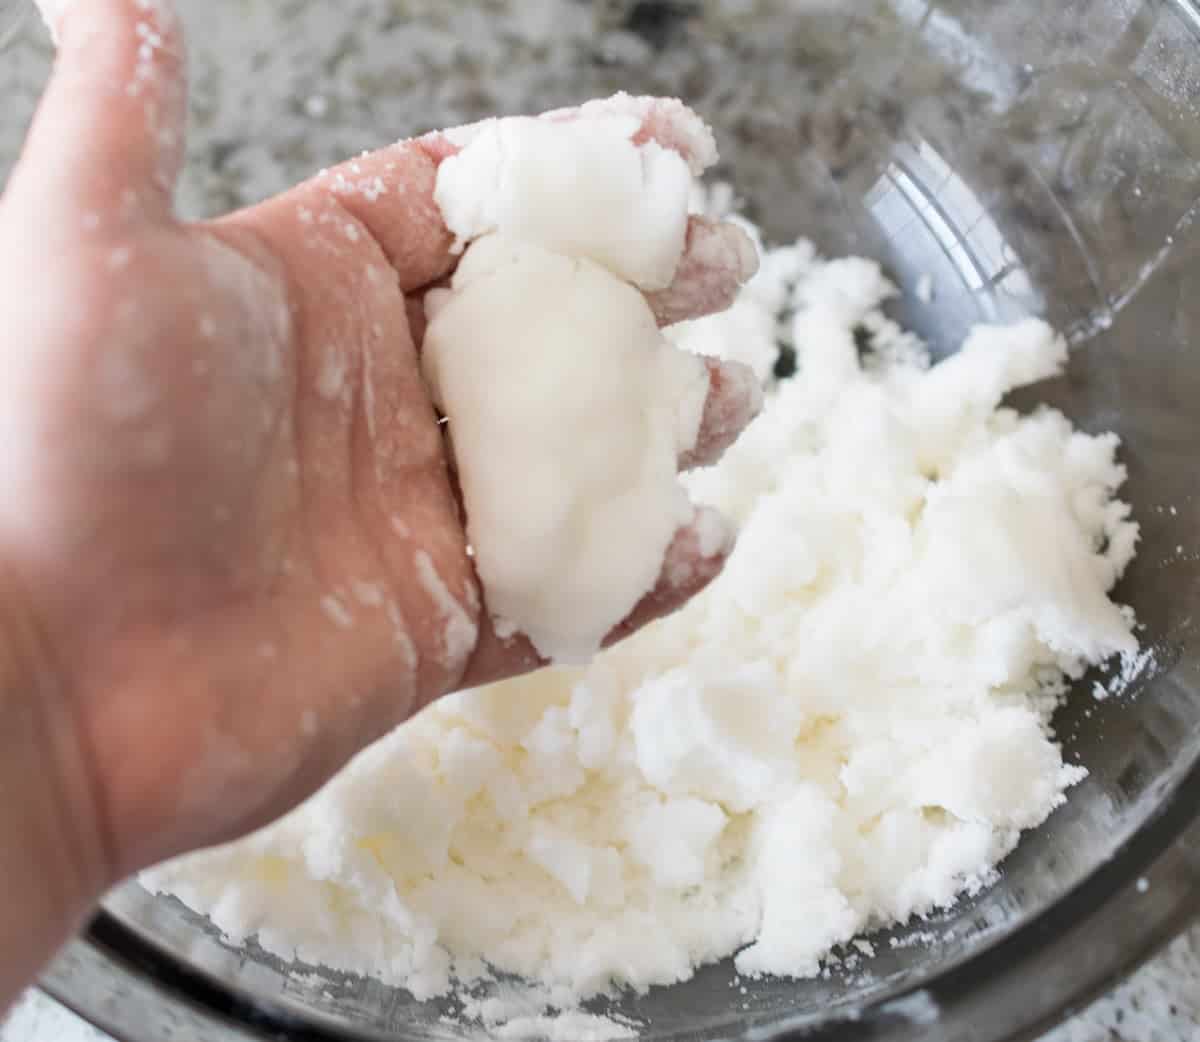 Hand mixing white base for bath bomb mixture in glass bowl